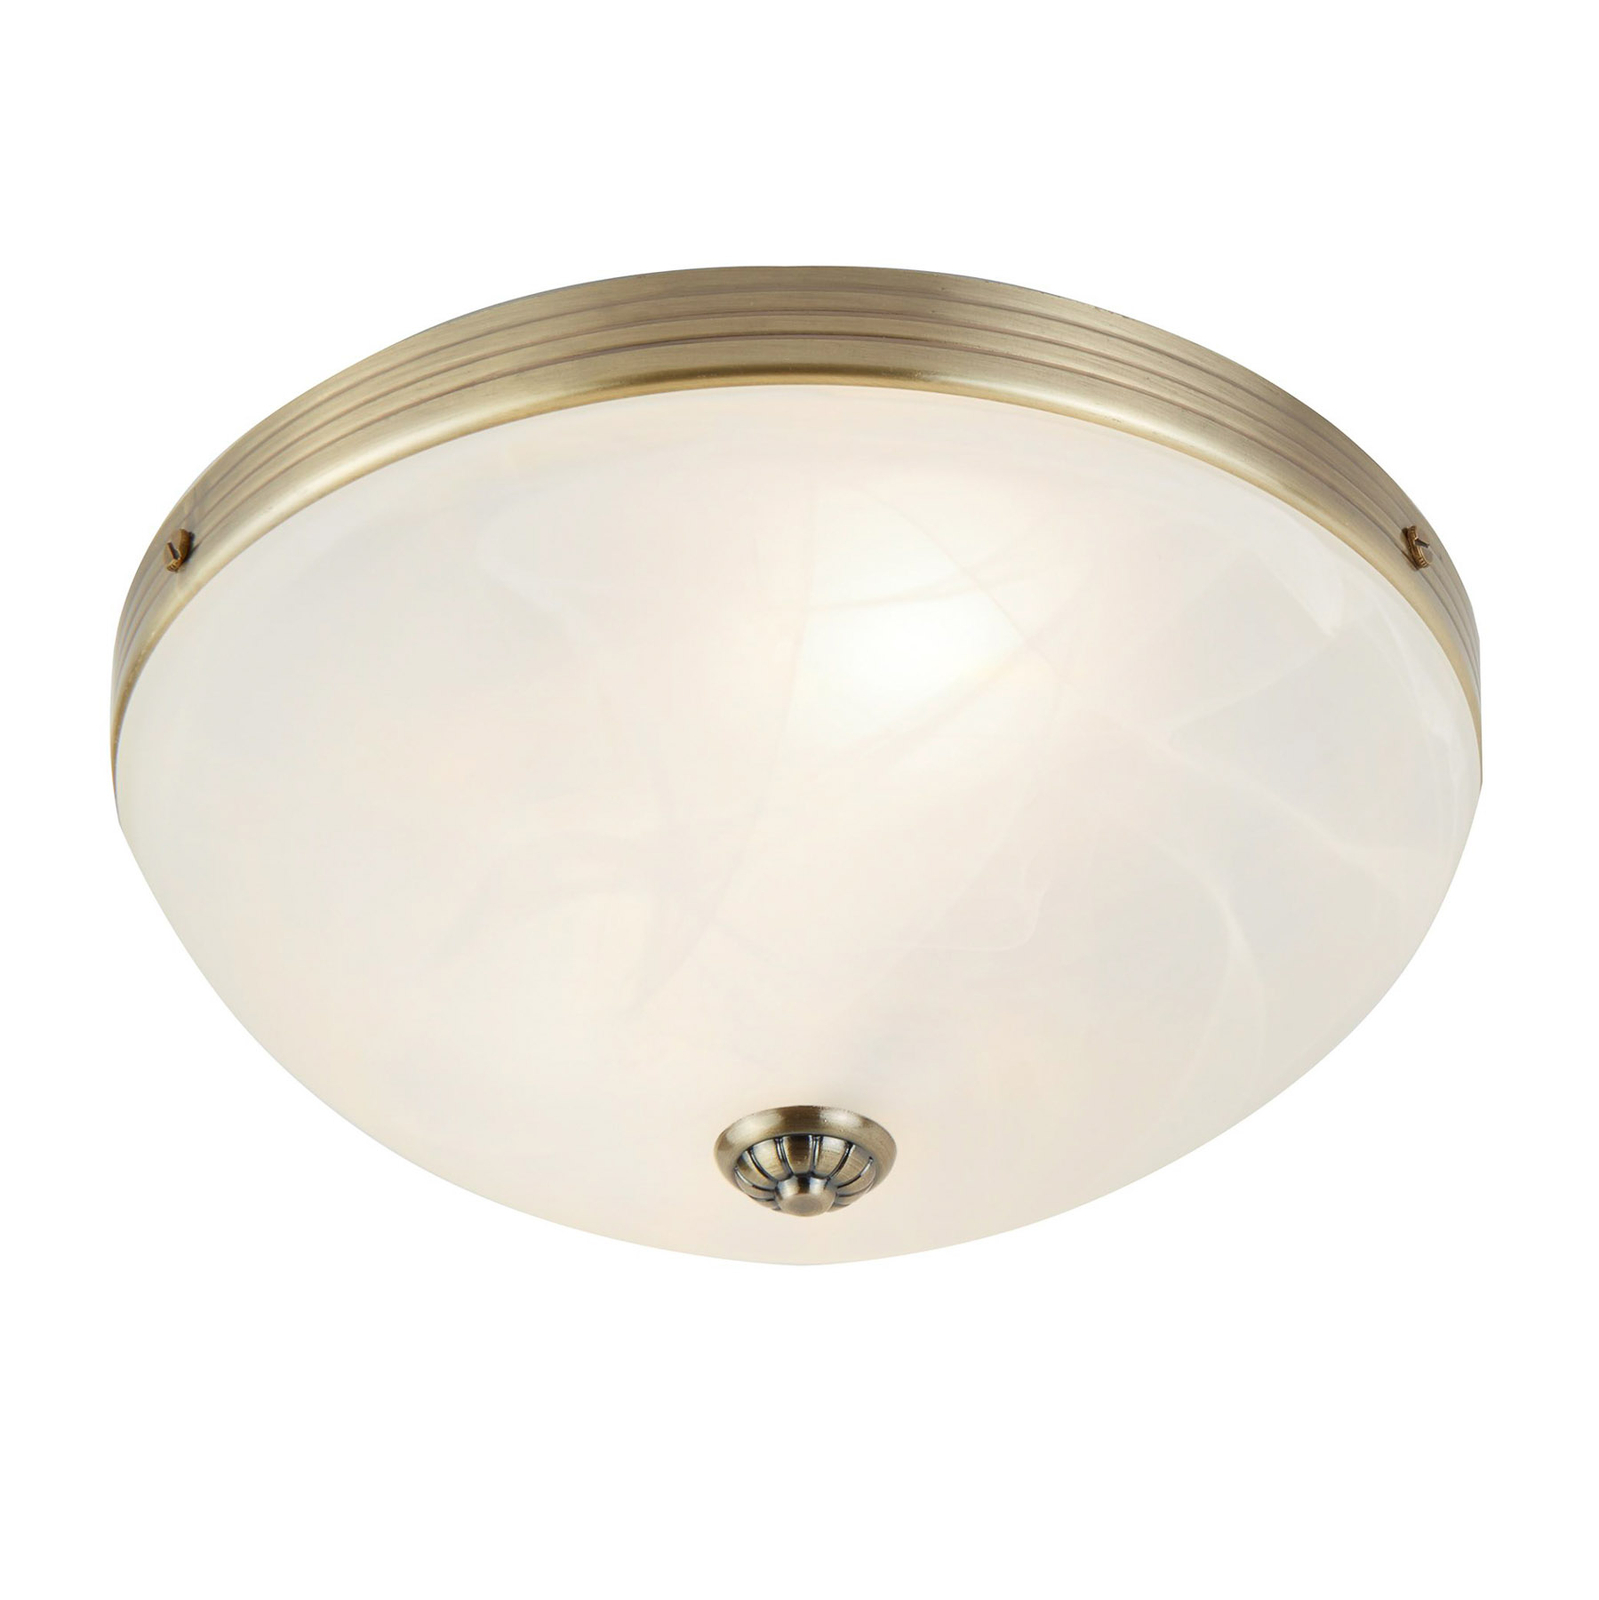 Windsor ceiling light with an antique brass look